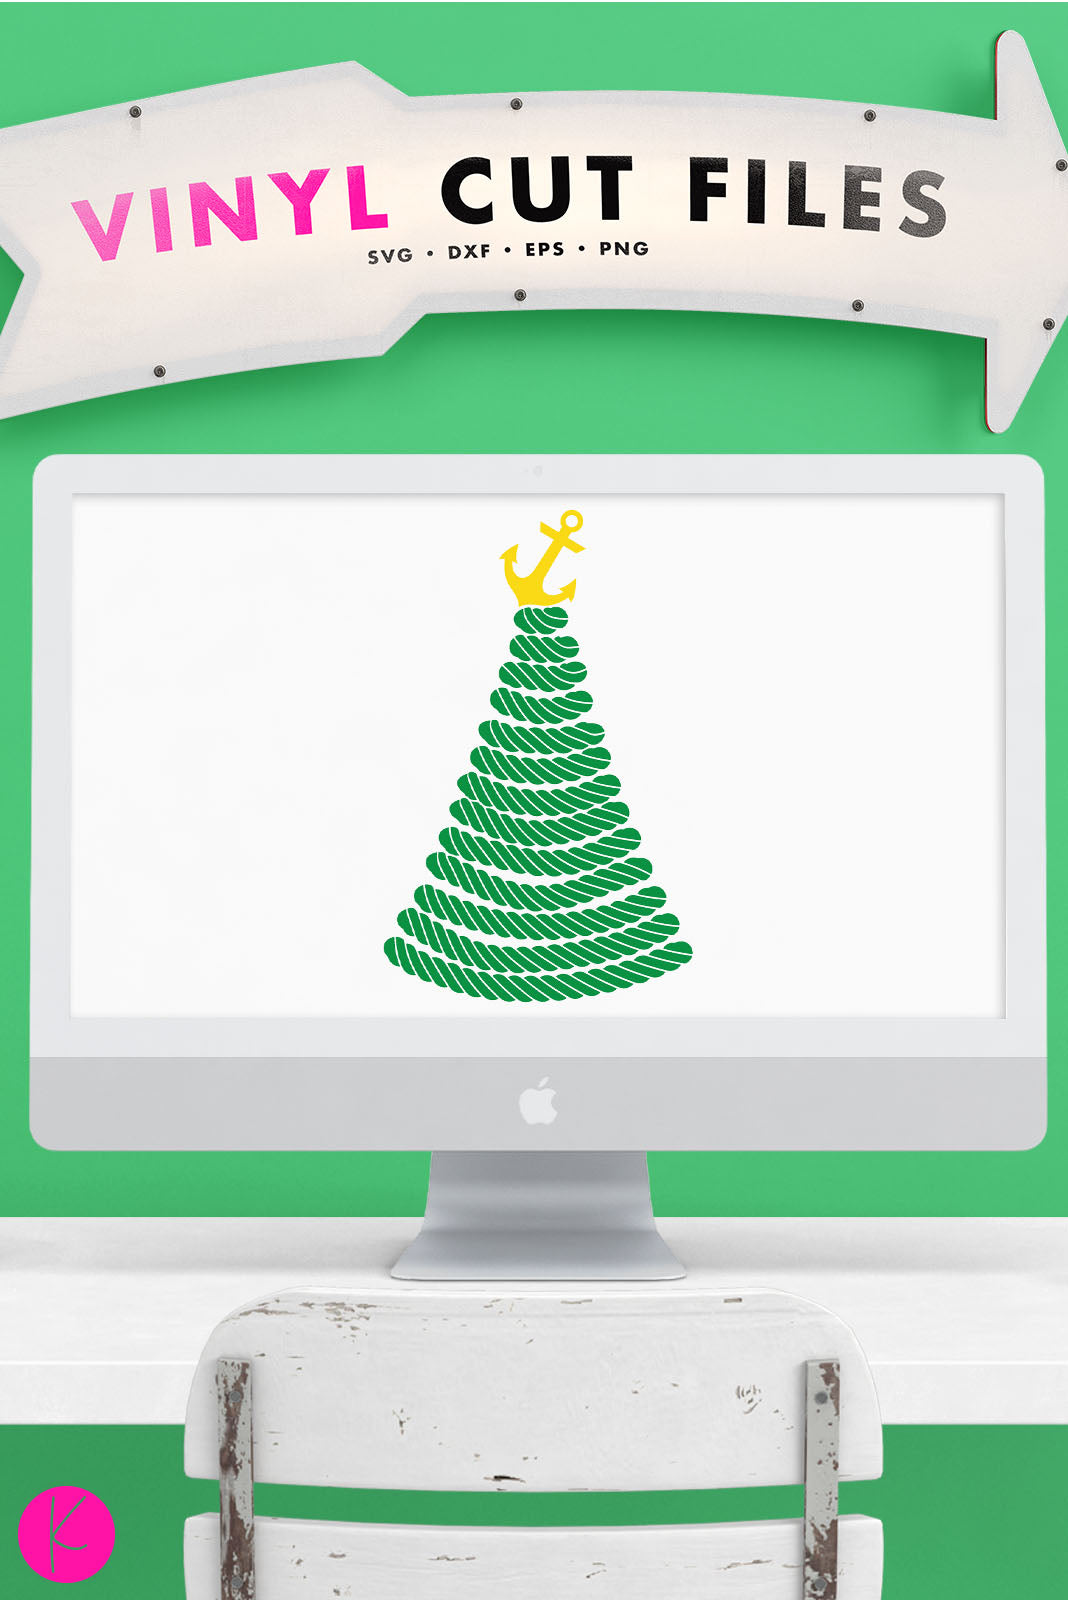 Nautical Christmas Tree | SVG DXF EPS PNG Cut Files